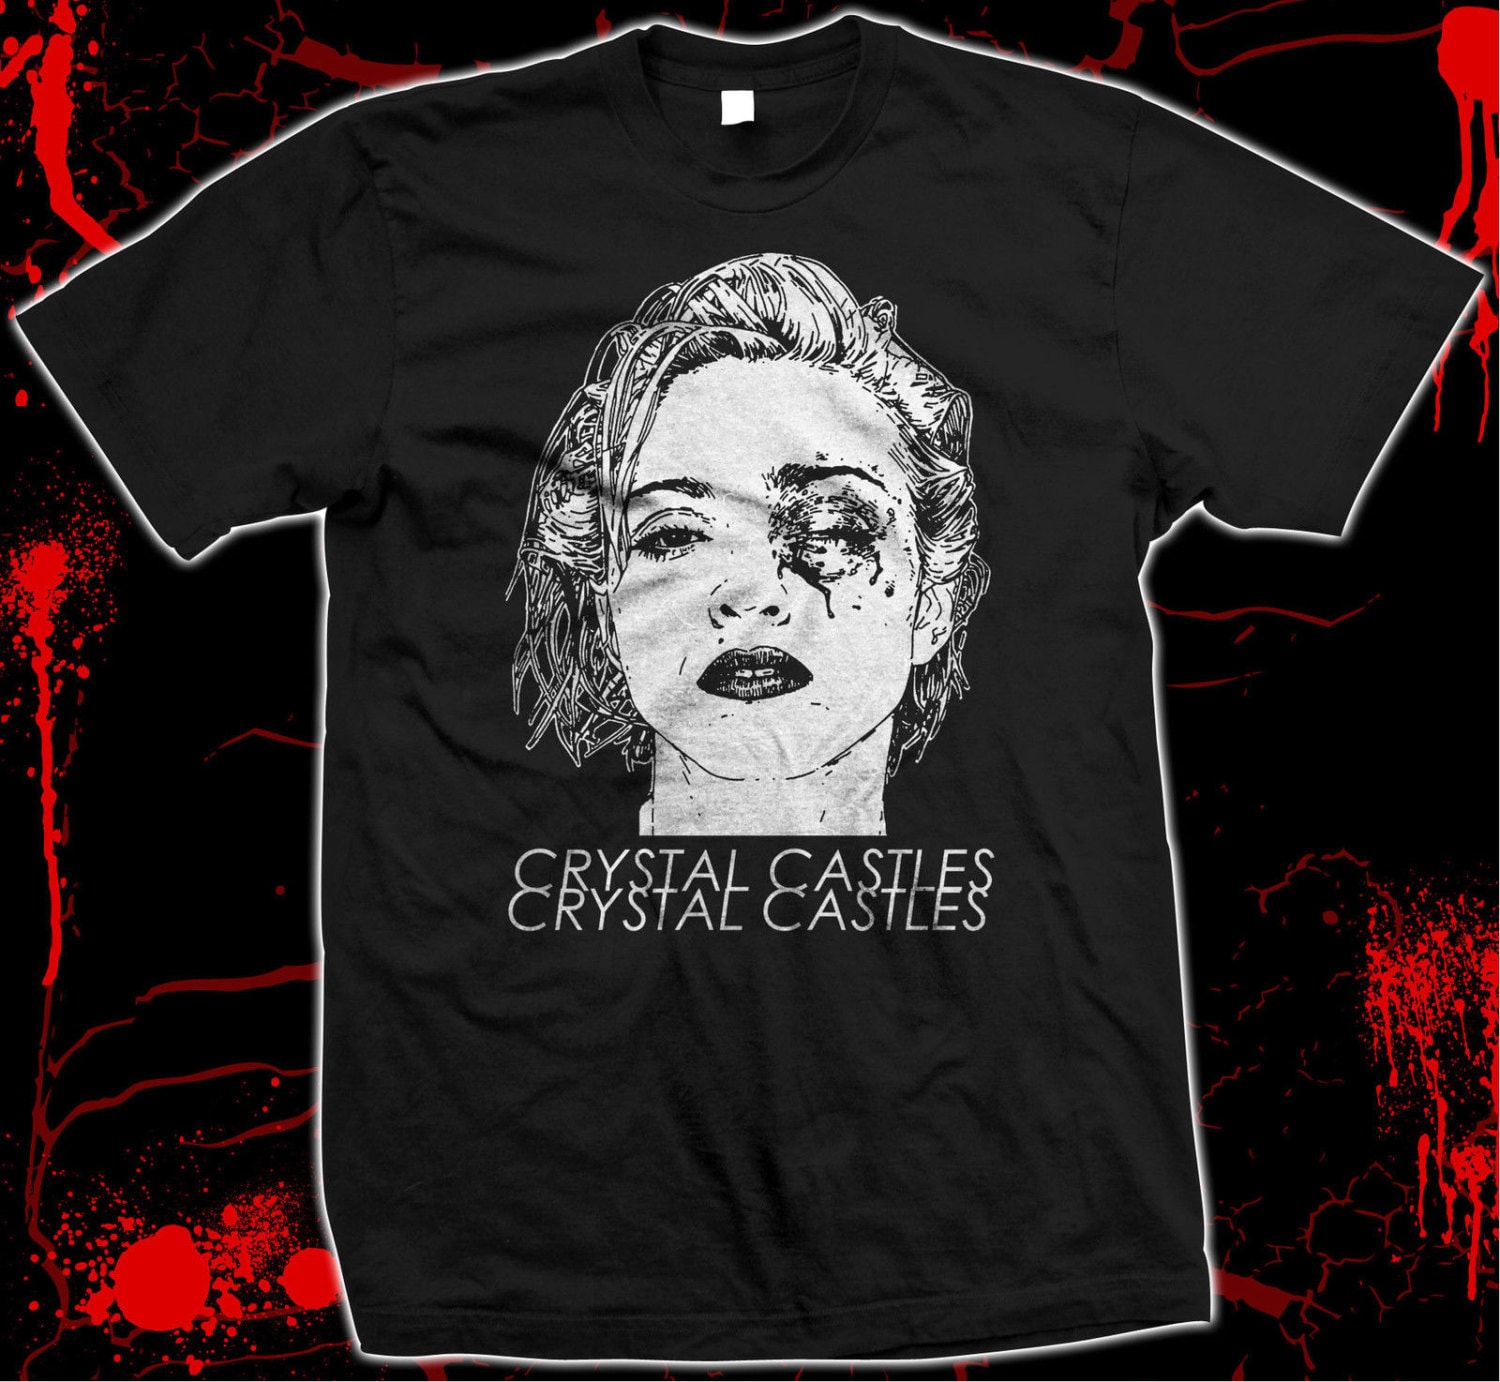 Crystal Castles - Madonna Bruised - Pre-shrunk, hand screened 100% cotton  t-shirt